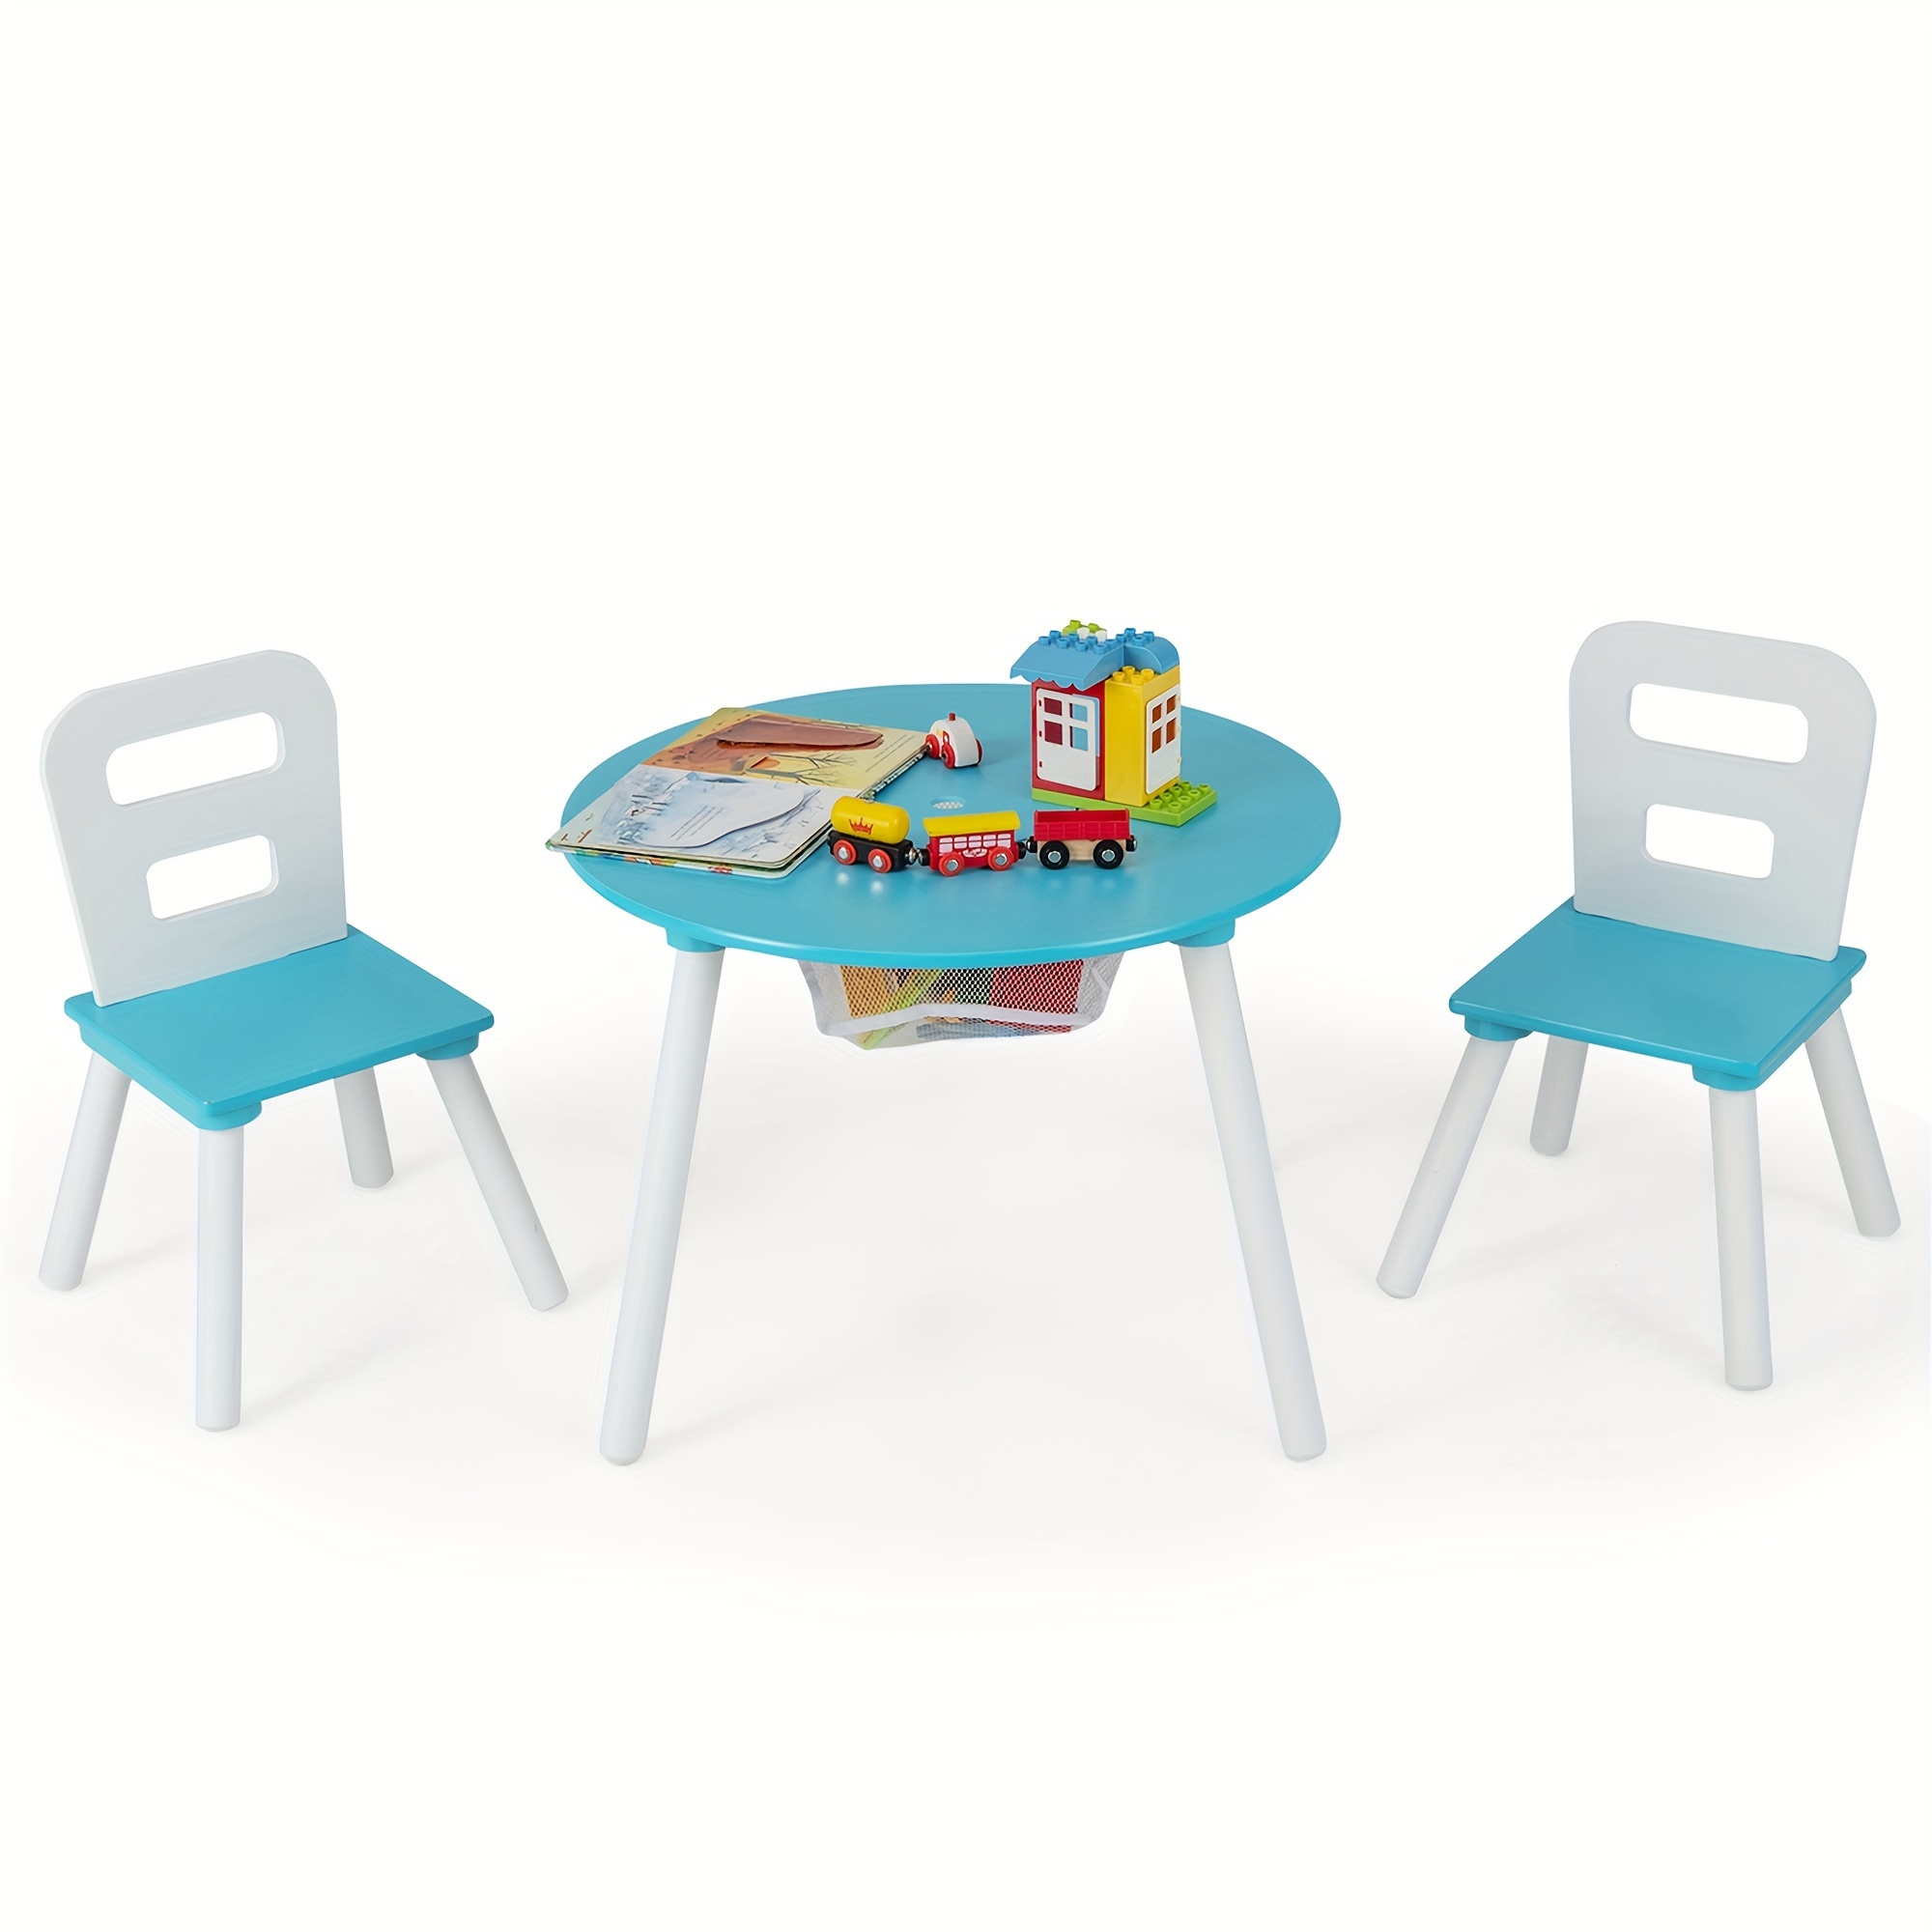 

1pc 3-piece Wooden Round Table & 2 Chair Set With Center Mesh Storage, Blue, Durable Furniture, Perfect For Playroom, Reading, Snack Time Table